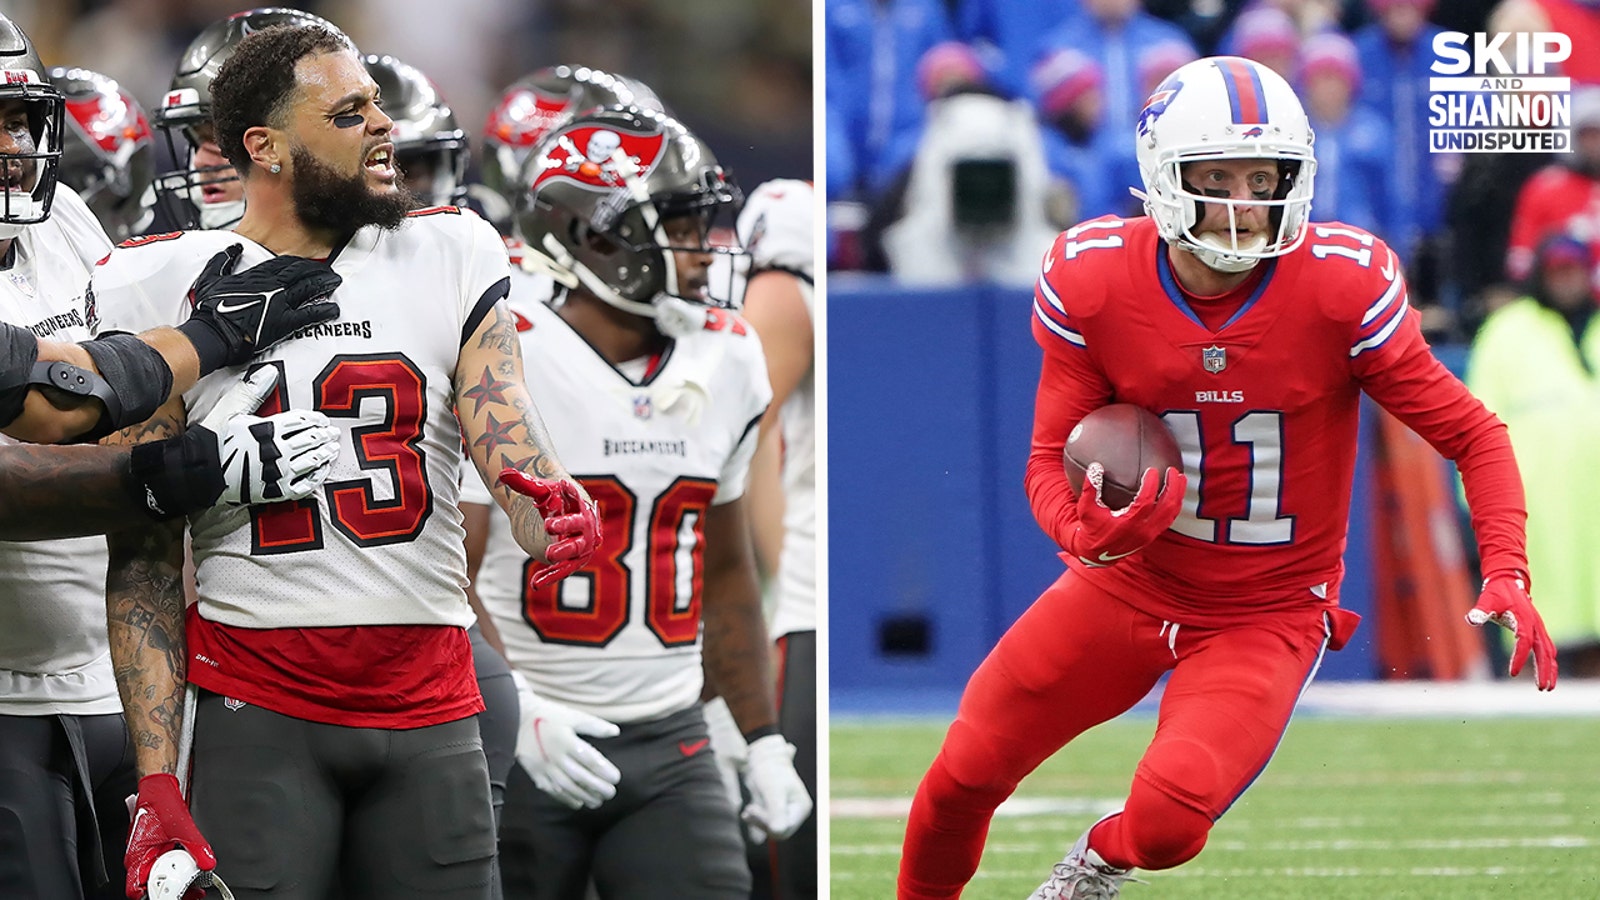 With Mike Evans suspended for one game, will Cole Beasley help Bucs?